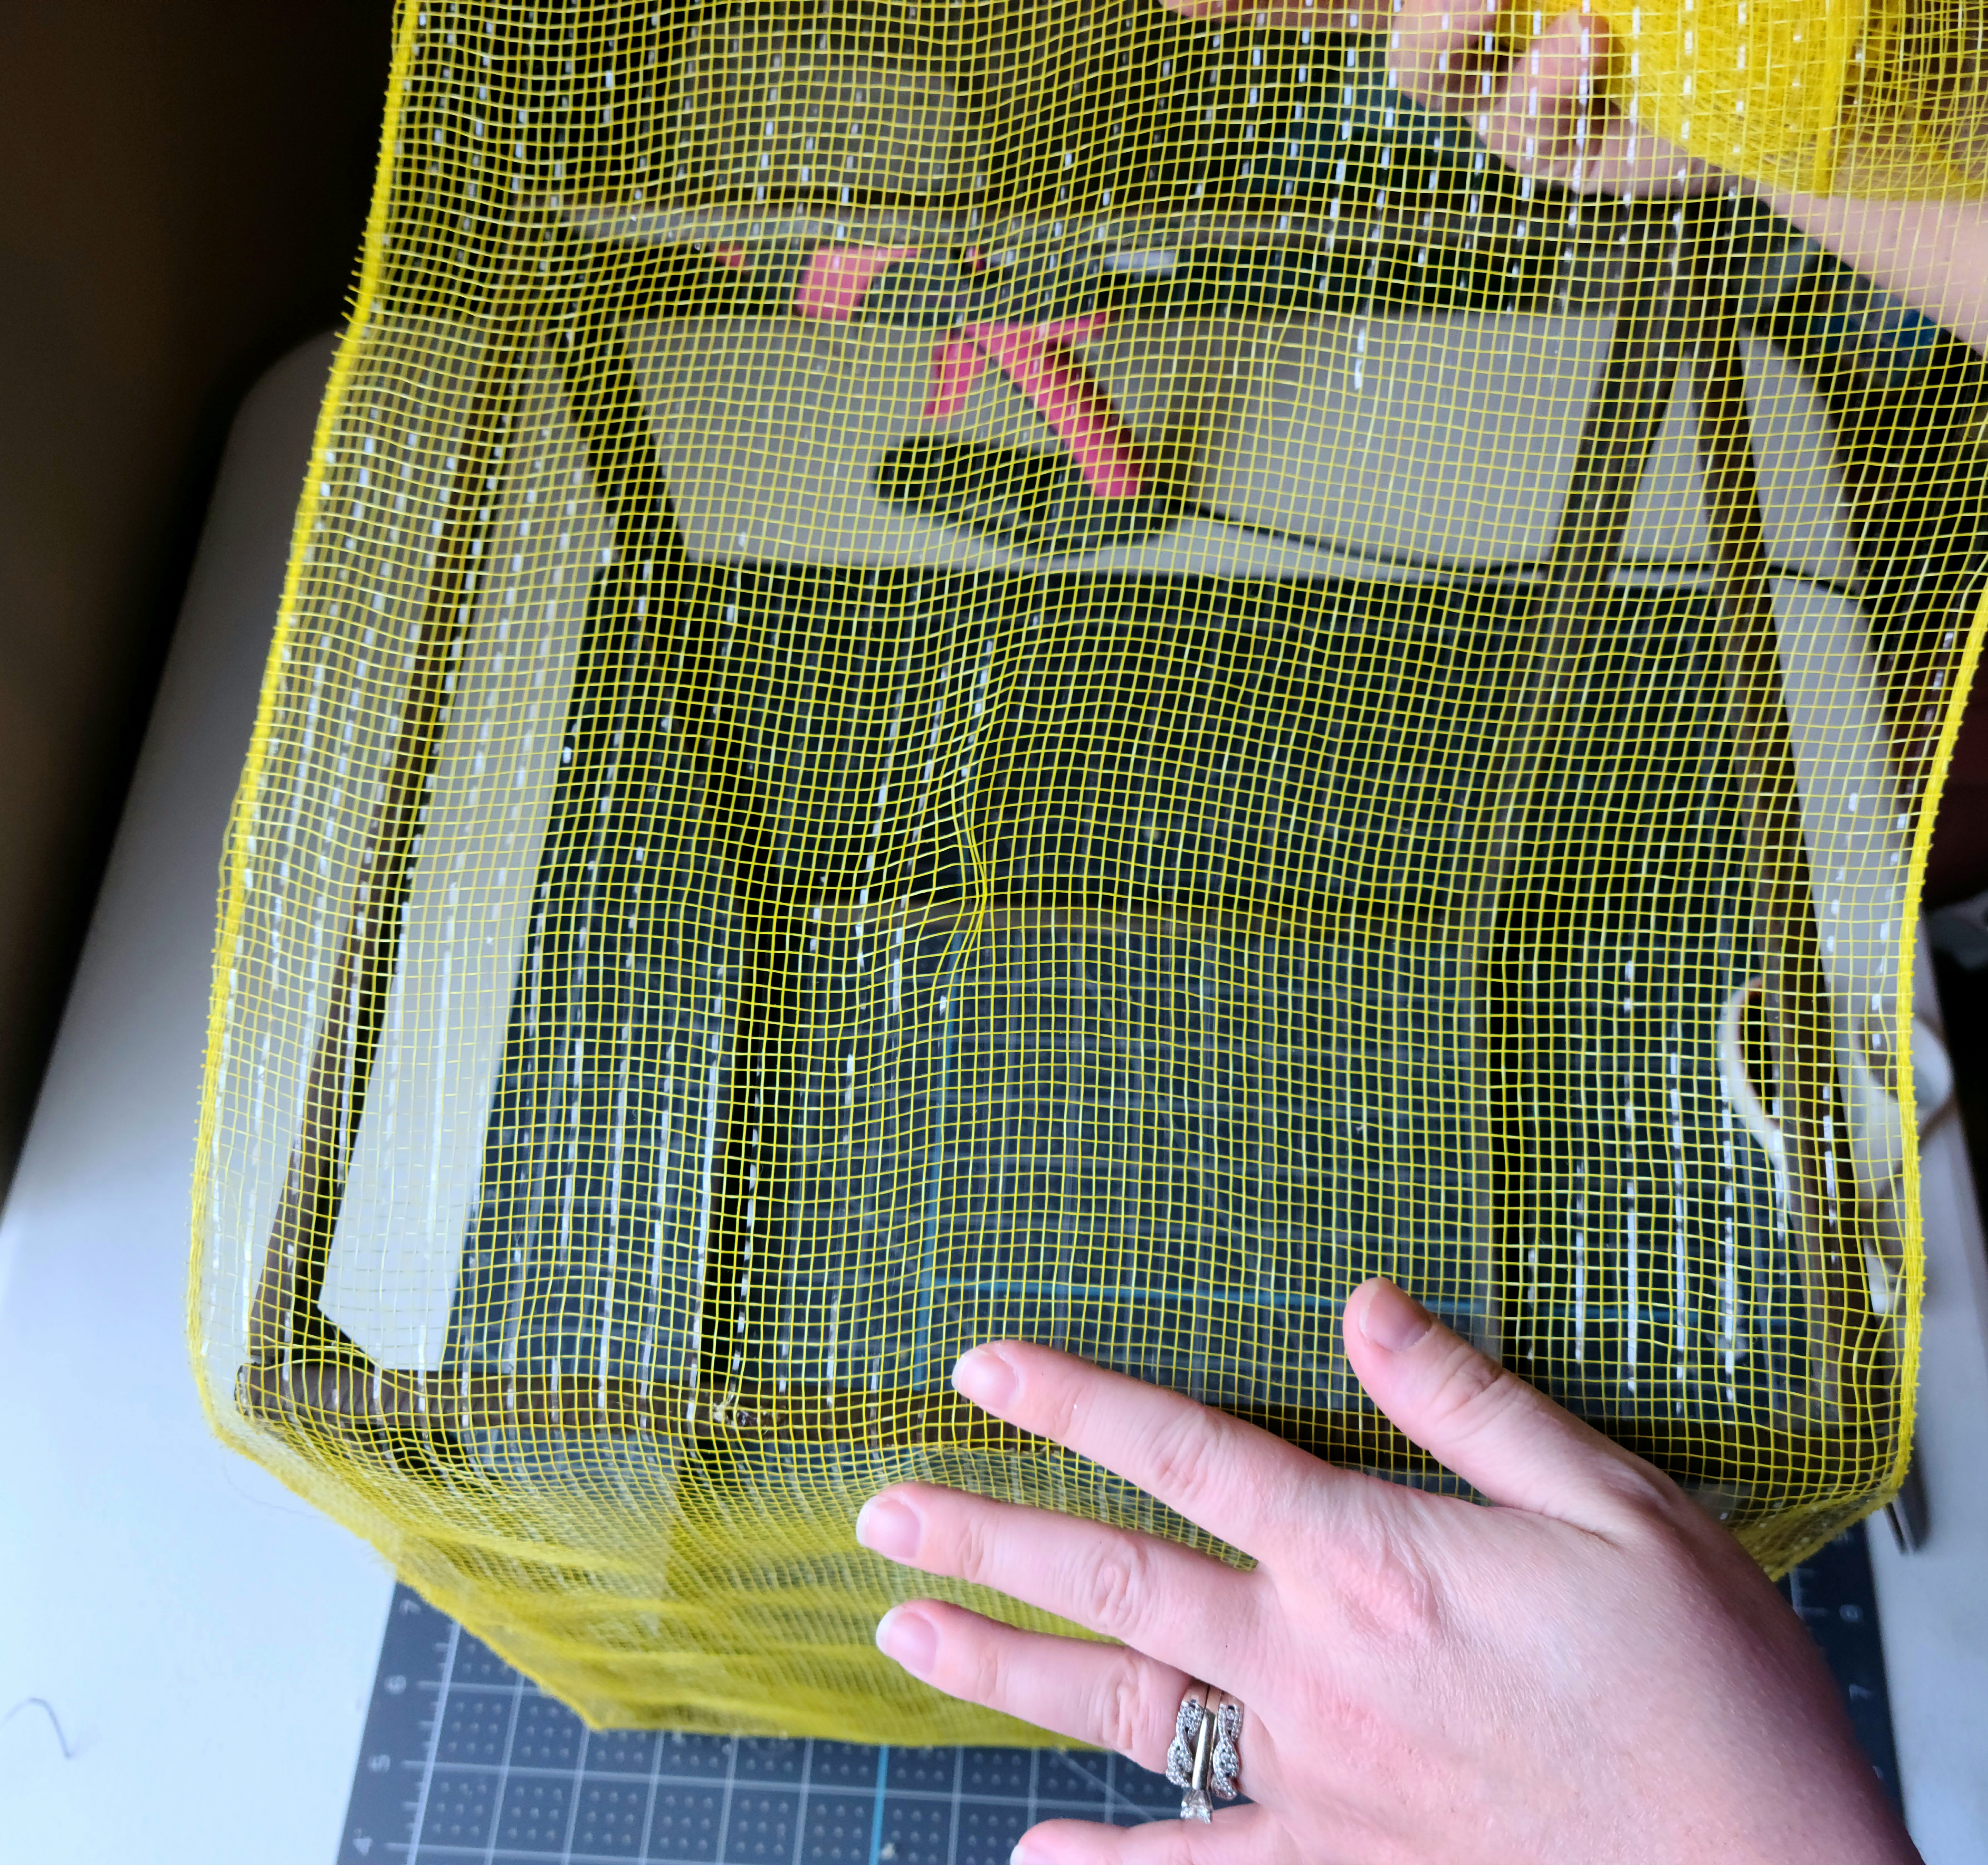 Pulling the deco mesh tight to cover the second side on the frame of the DIY lighted gift box.